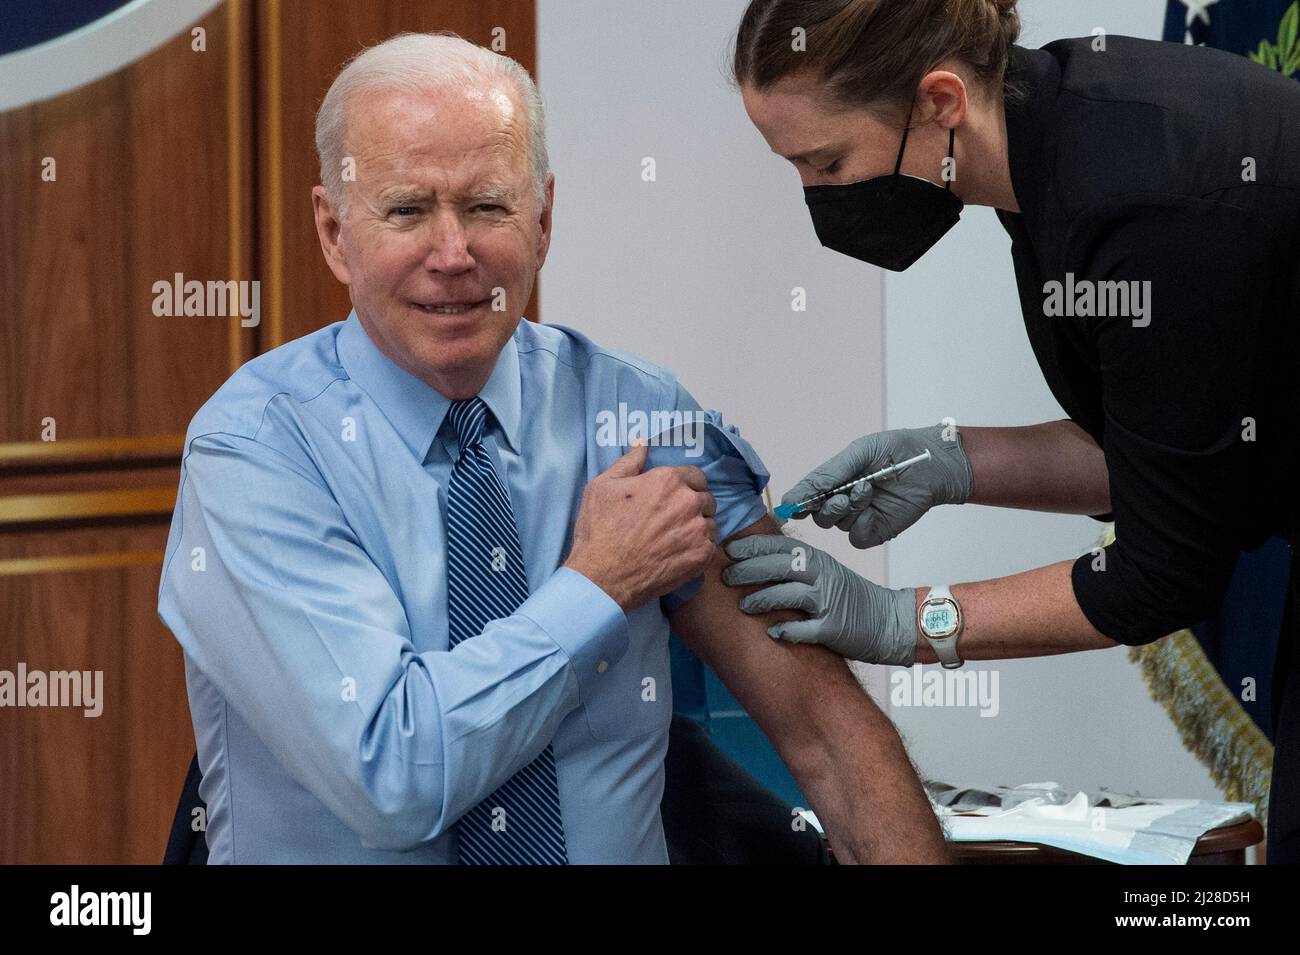 United States President Joe Biden receives his second COVID booster shot from Pfizer, by a member of the White House Medical Unit, following his remarks on the status of the country's fight against COVID-19, in the South Court Auditorium of the Eisenhower Executive Office Building on the White House campus in Washington, DC, Wednesday, March 30, 2022. Credit: Rod Lamkey/Pool via CNP /MediaPunch Stock Photo